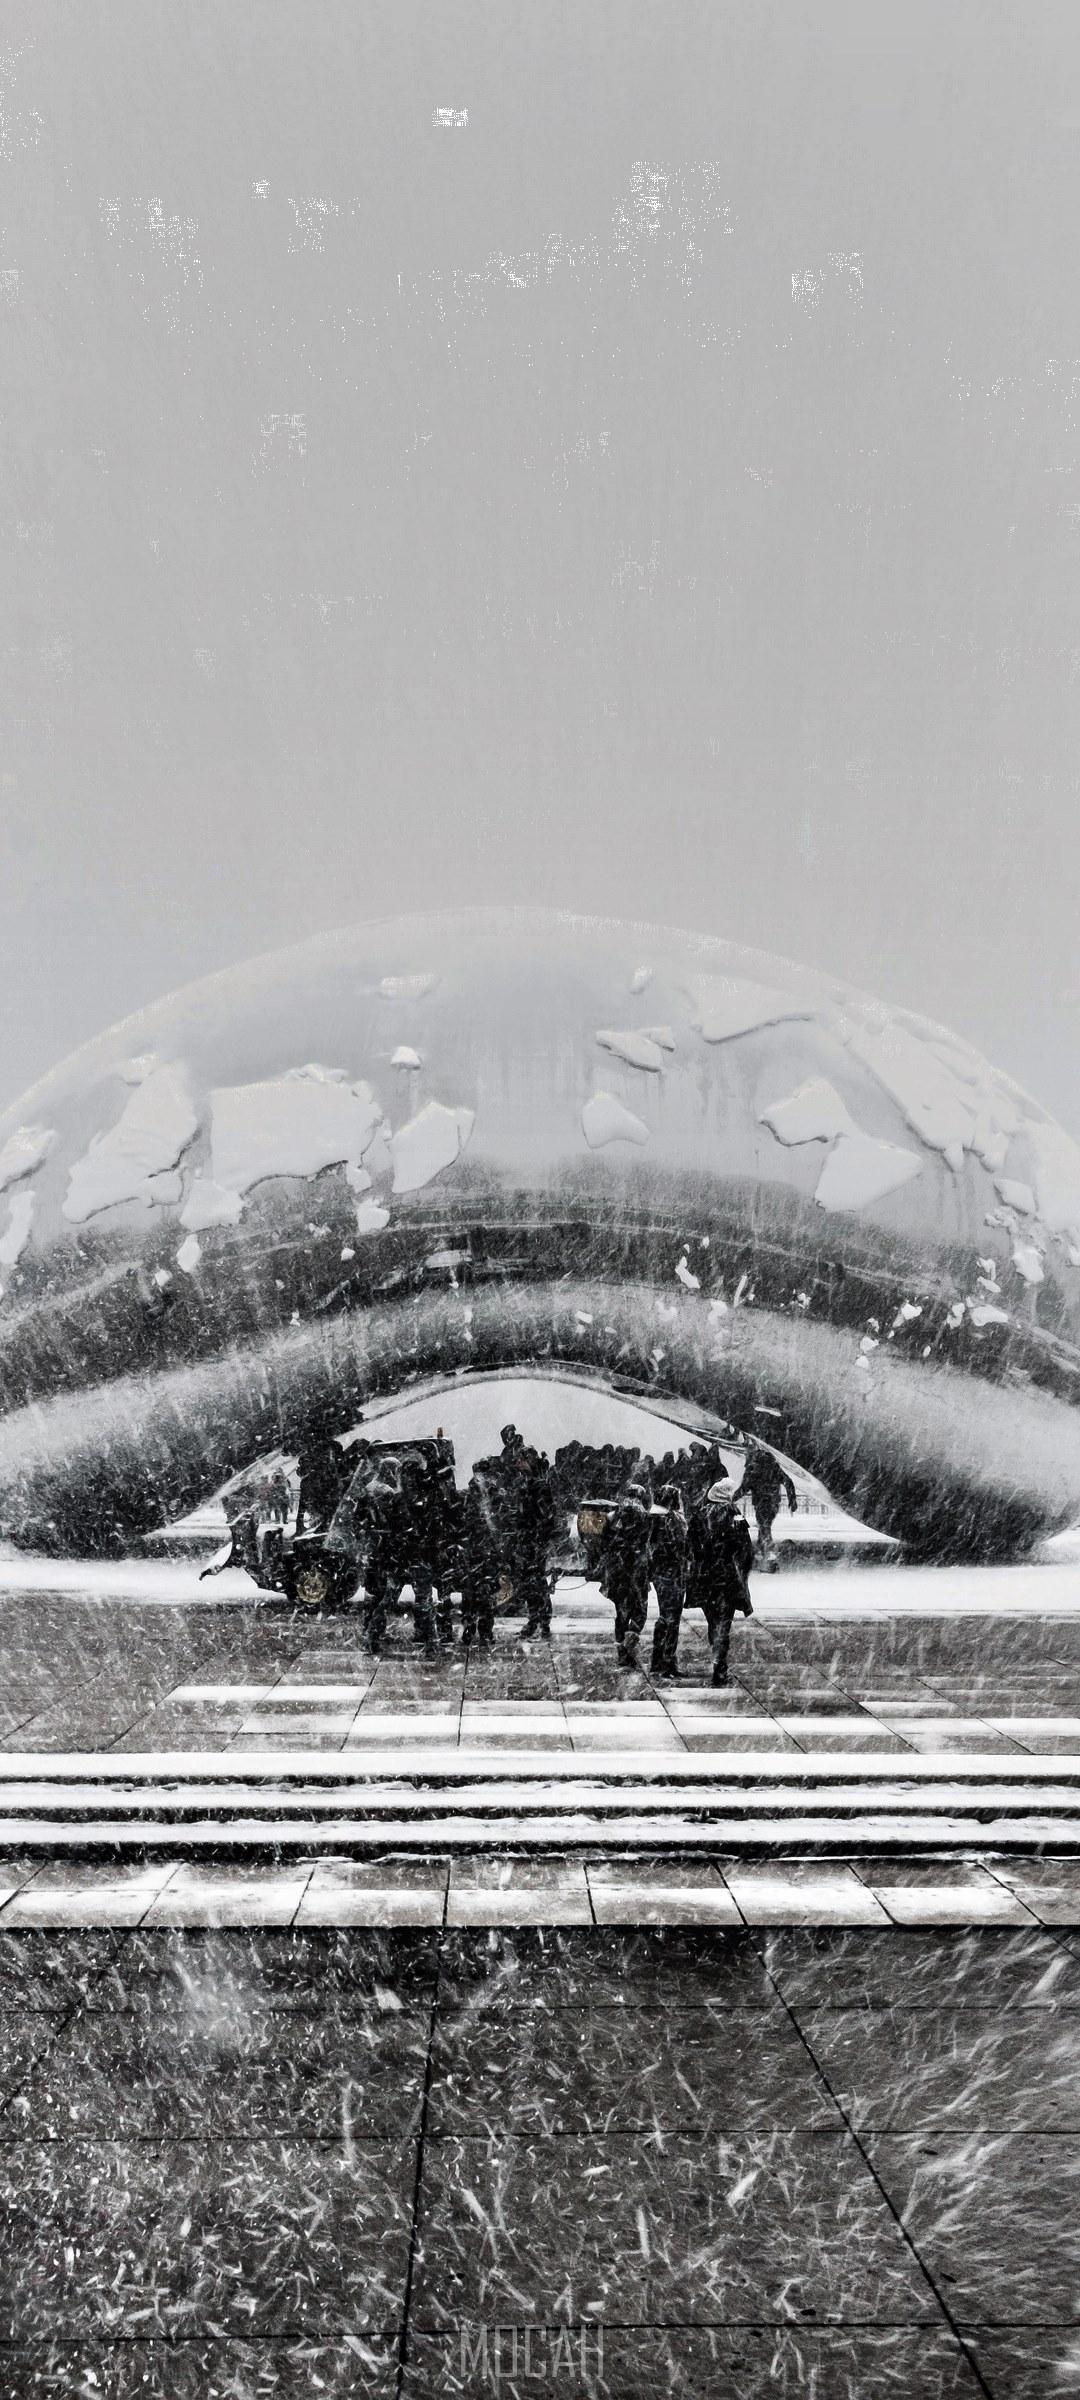 HD wallpaper, 1080X2400, Honor V30 Wallpaper Hd Free Download, Black And White Shot Of Group Of People Standing Near Modern Sculpture In Heavy Snow Chicago, The Bean Snowy In March